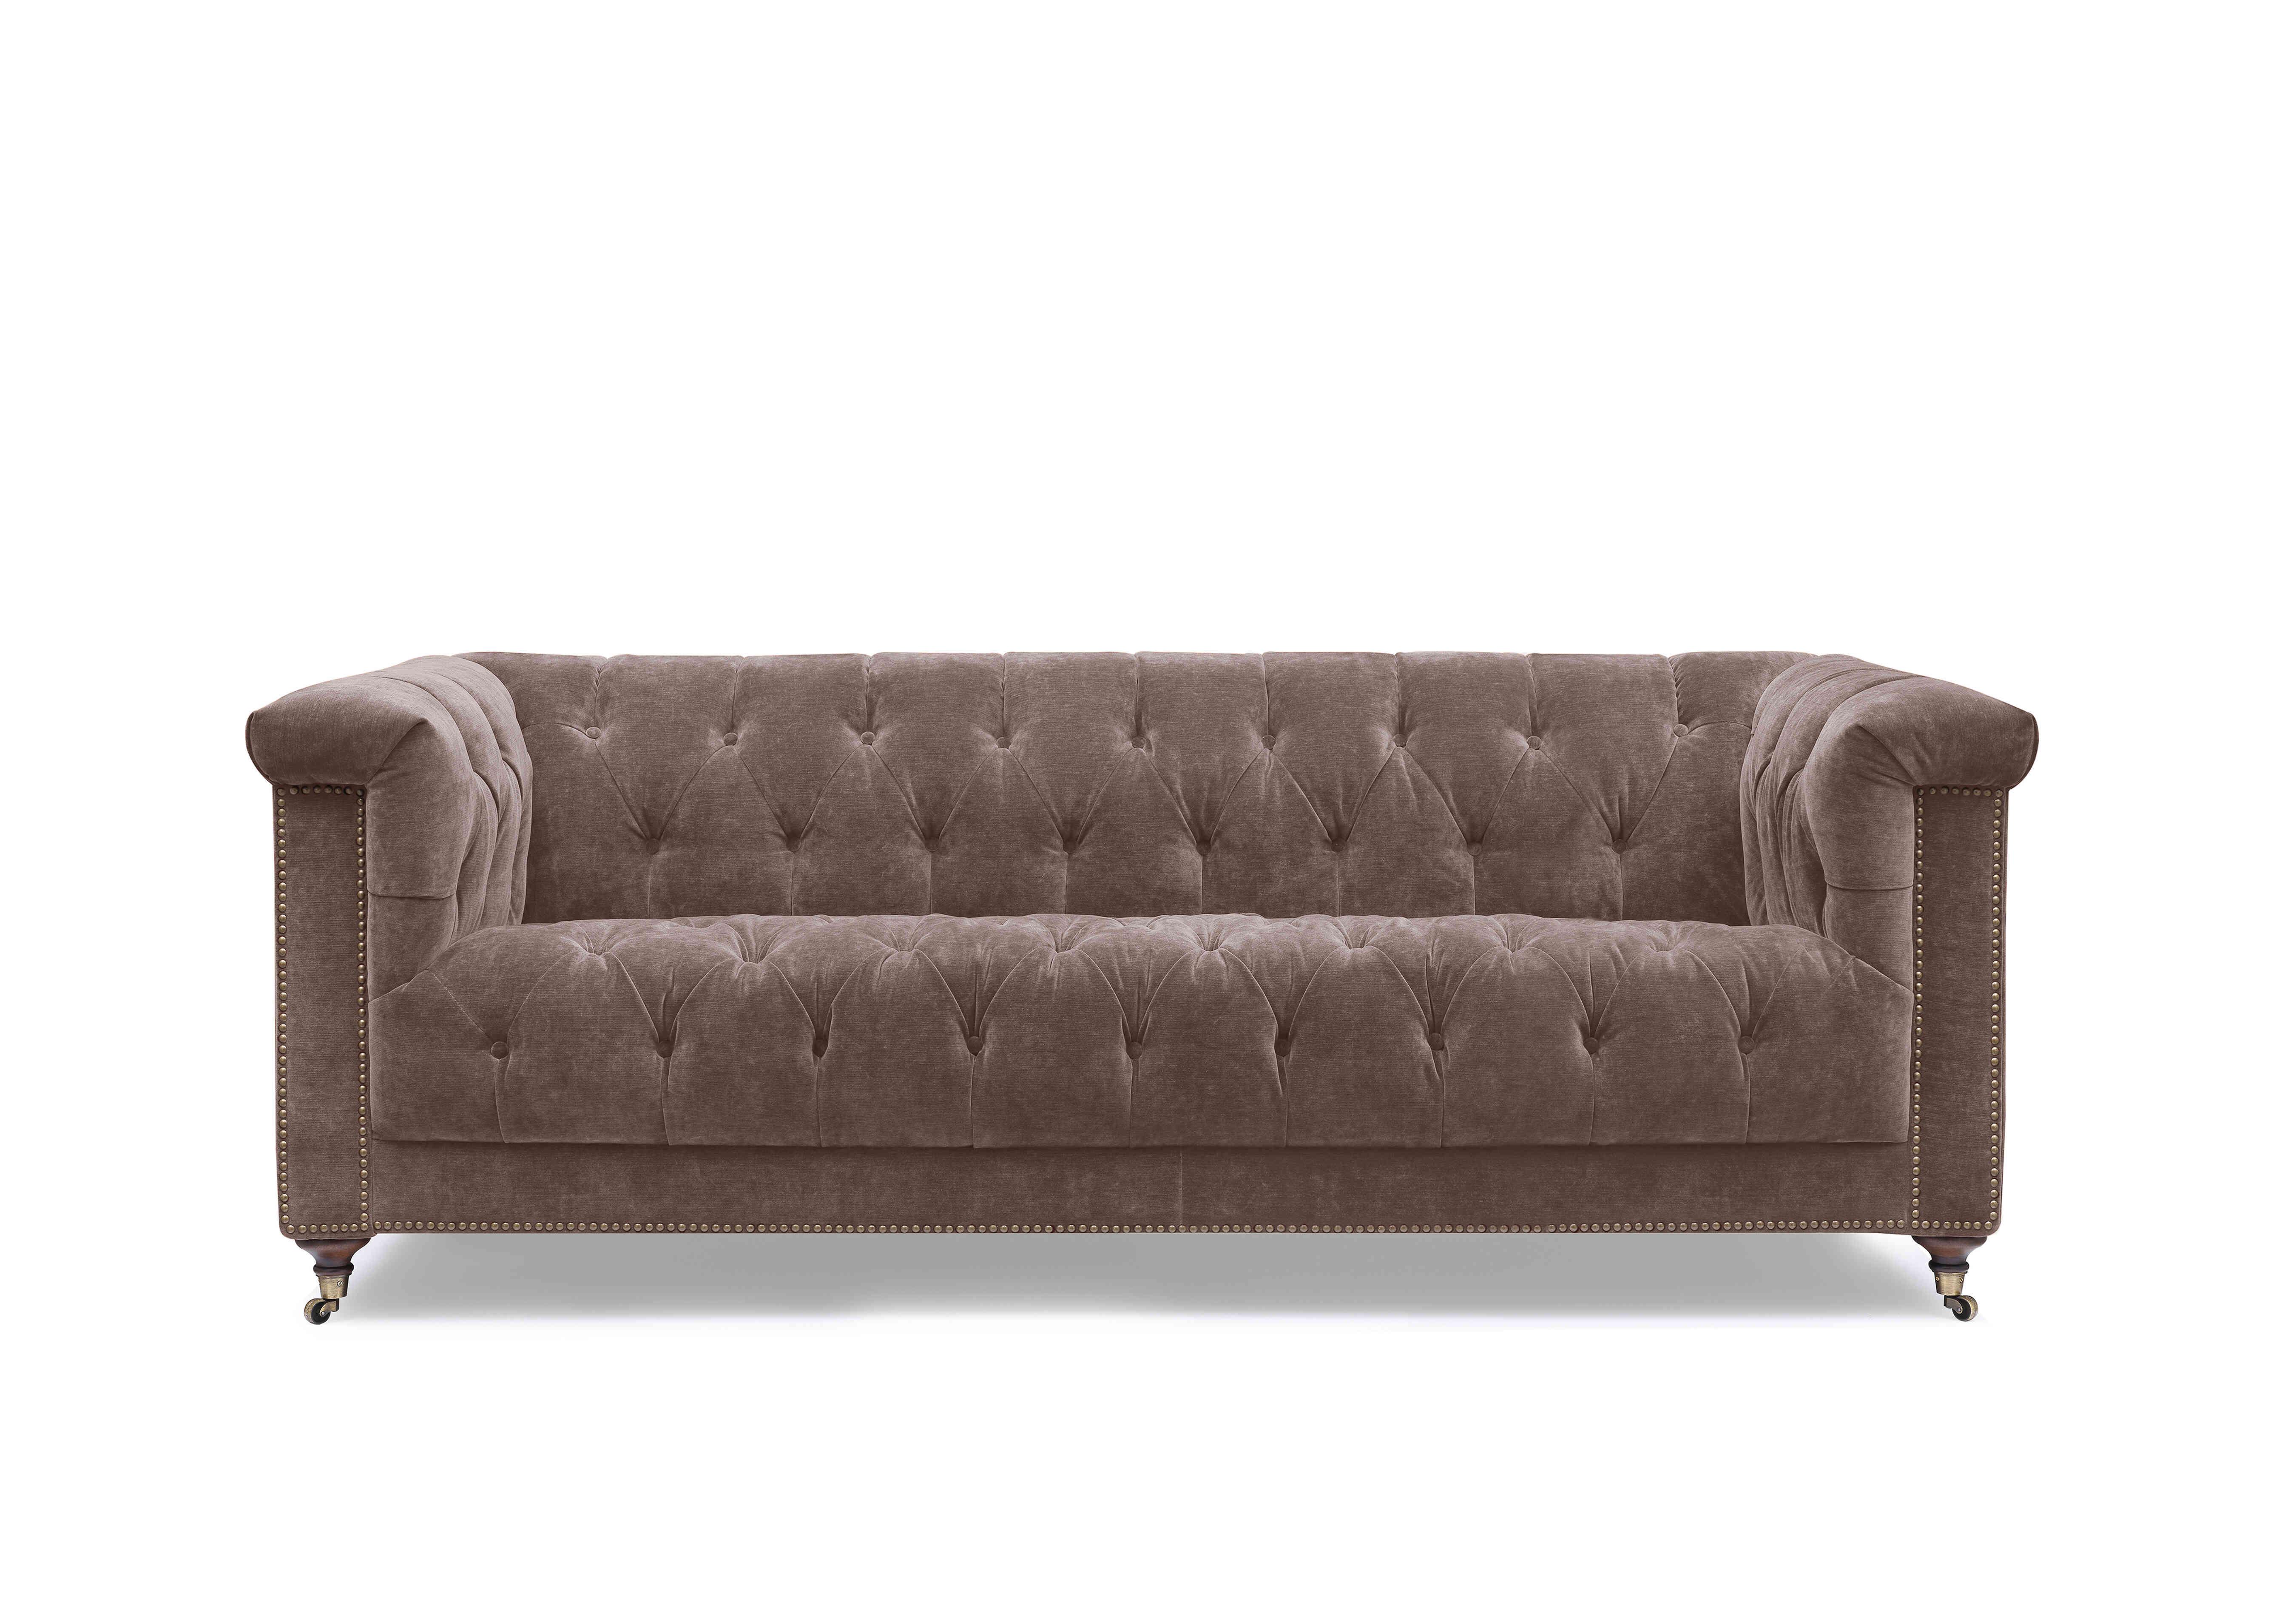 Wallace 3 Seater Fabric Chesterfield Sofa in X3y1-W023 Antler on Furniture Village